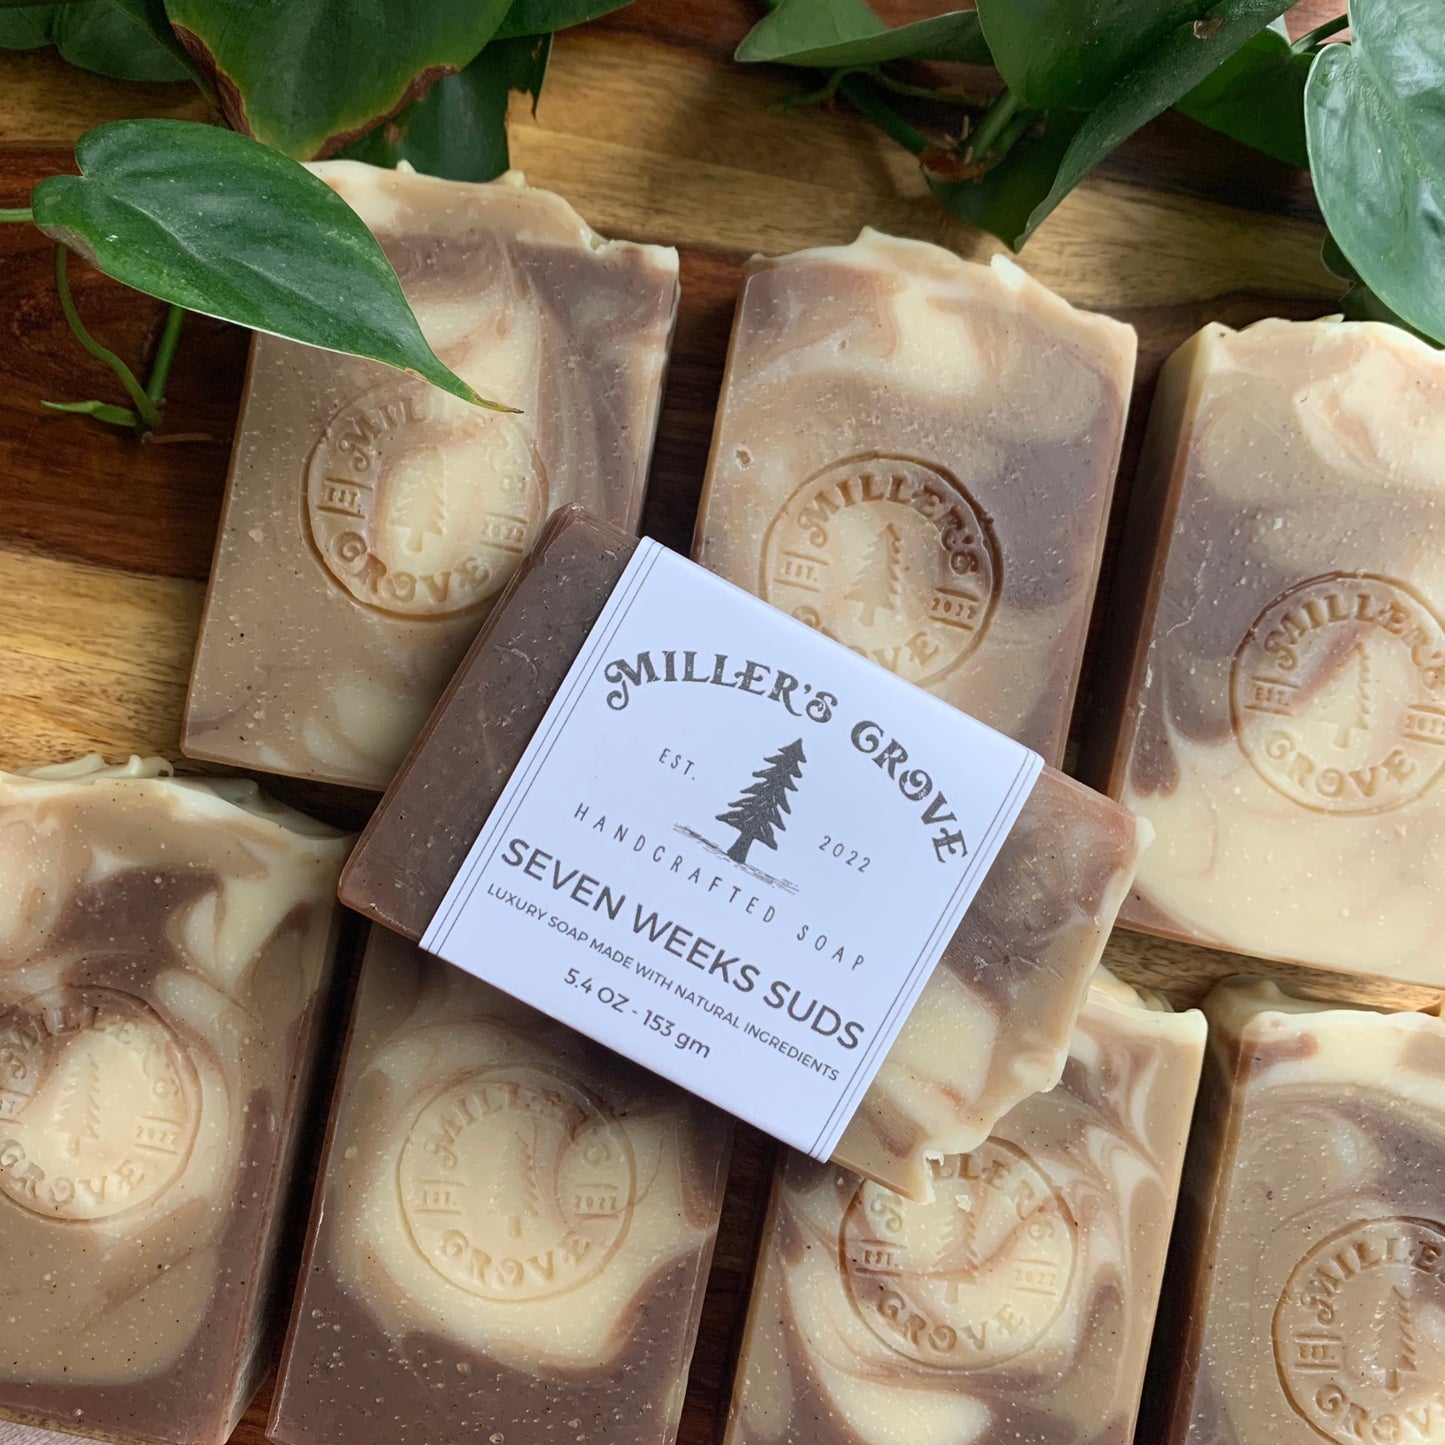 ASEVEN WEEKS SUDS - Miller's Grove Soap